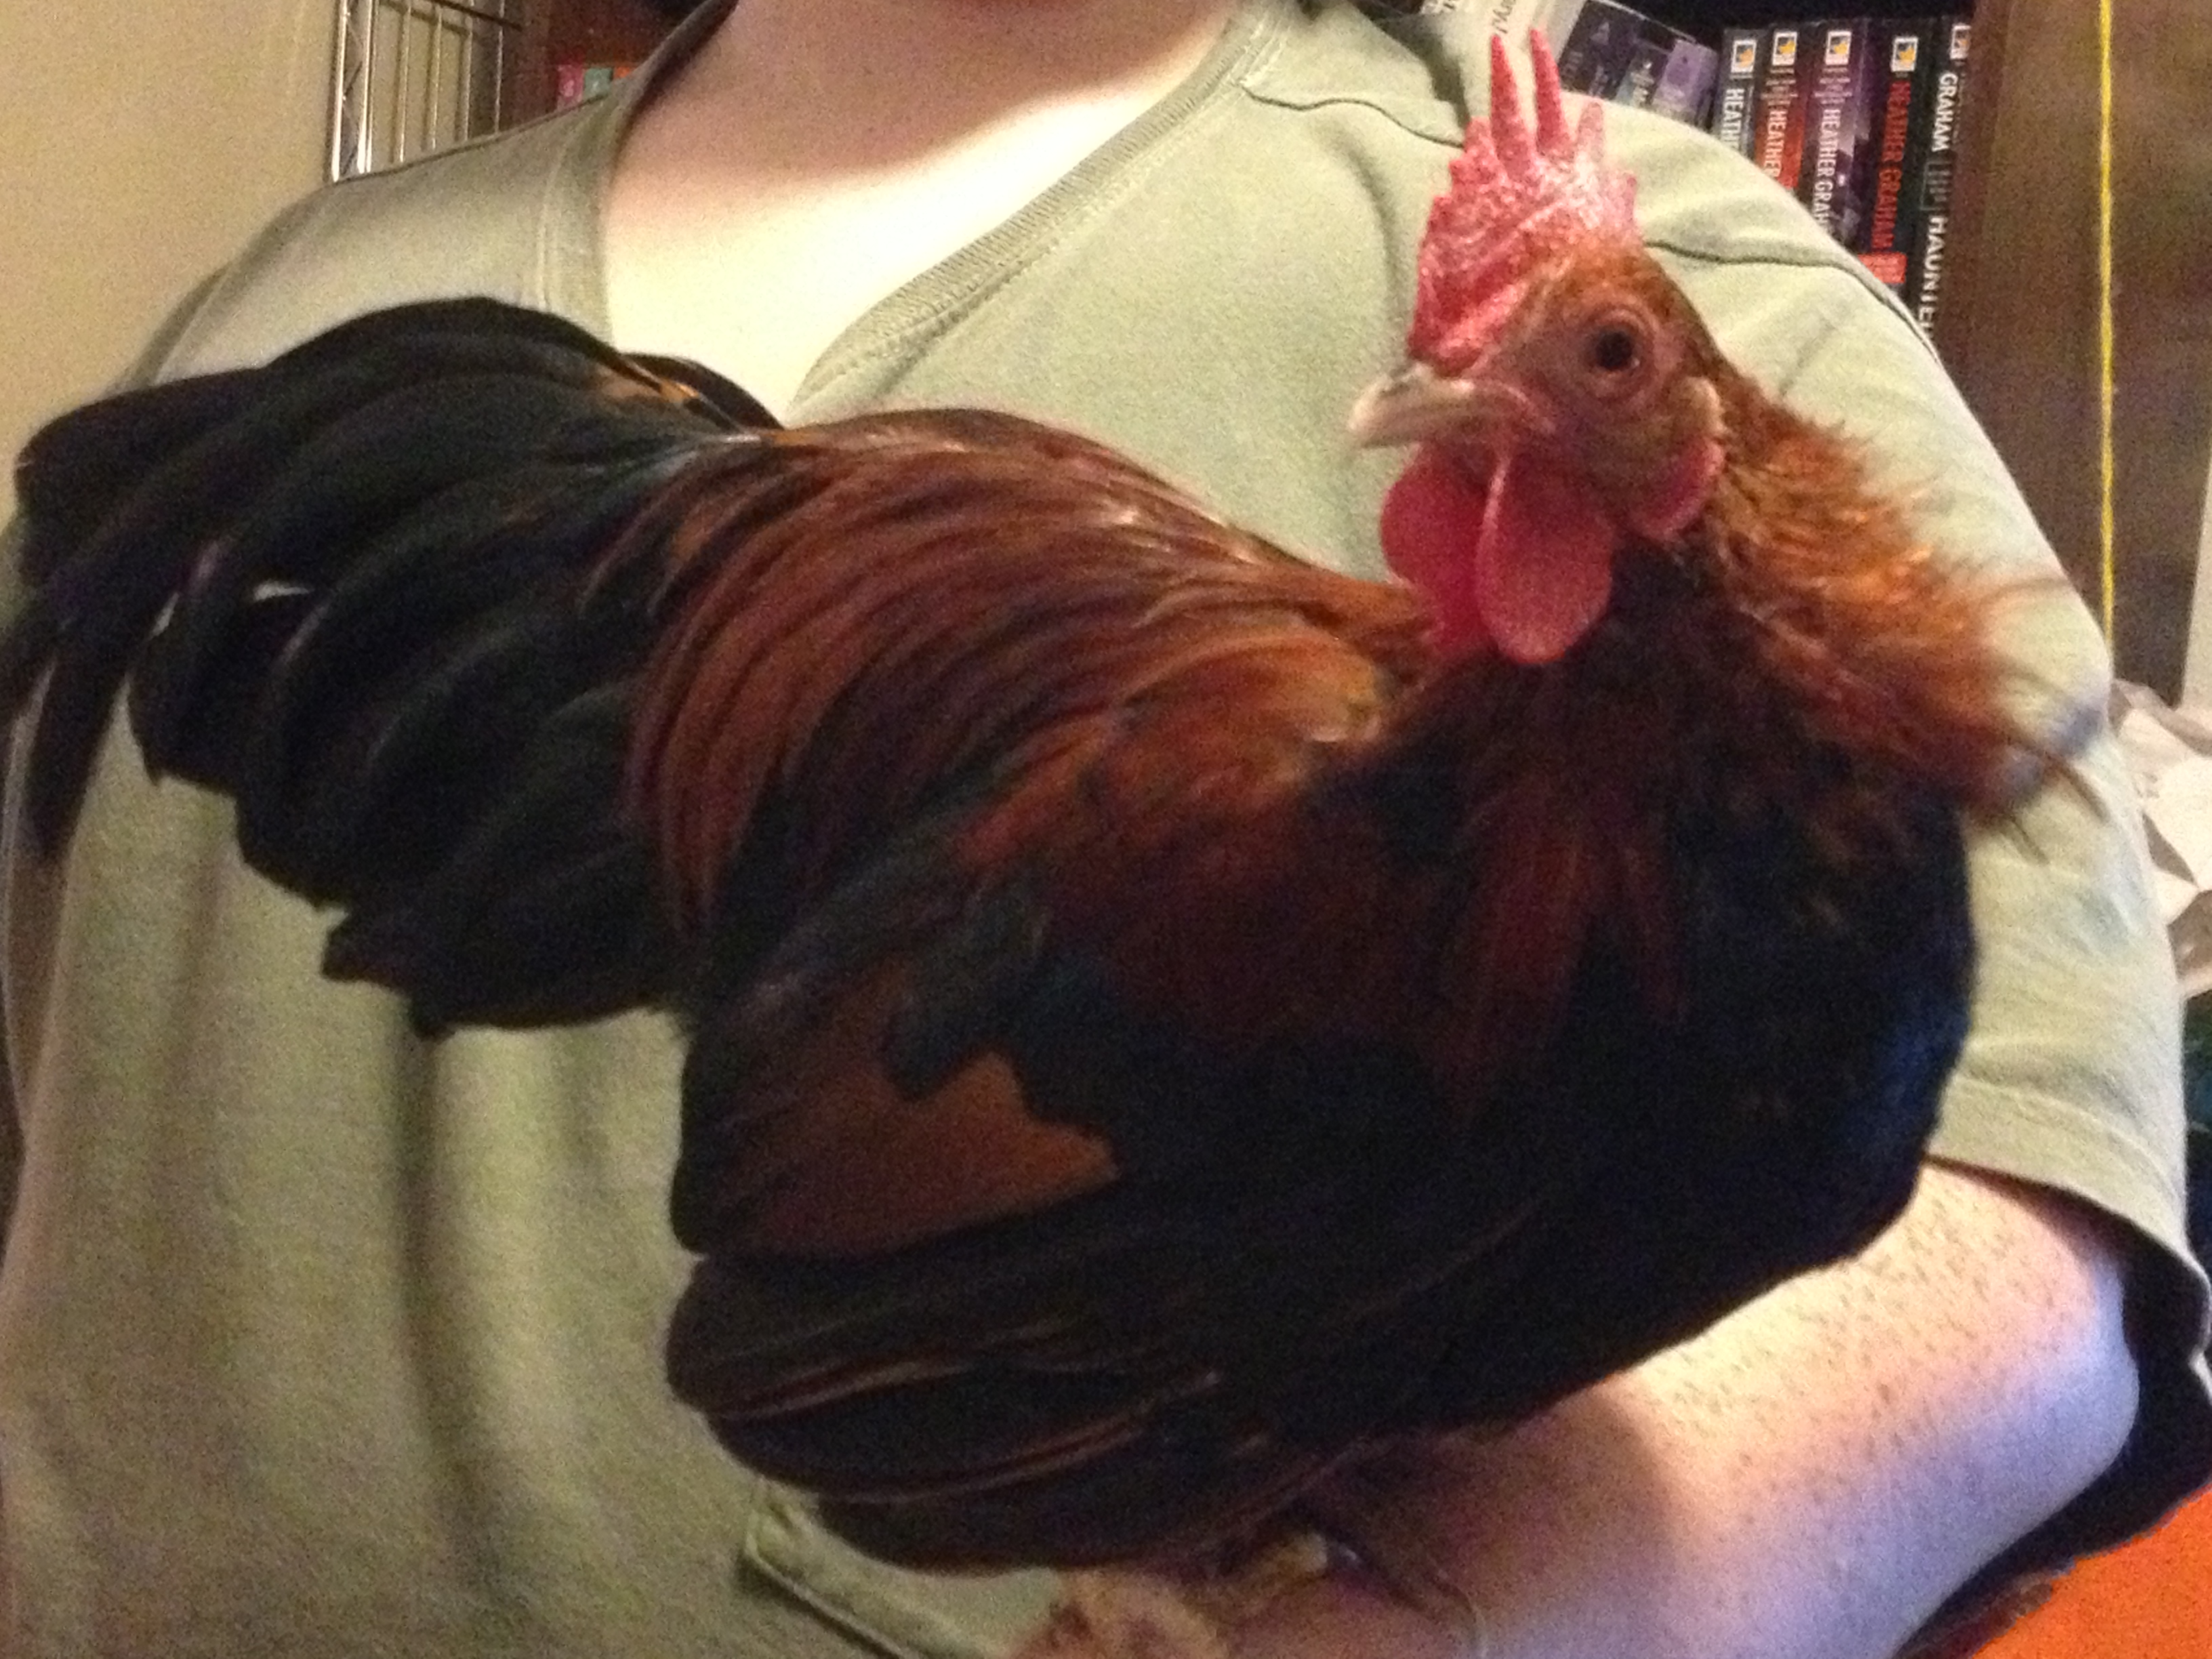 this is Hank, my serama rooster
we got a really good deal on him